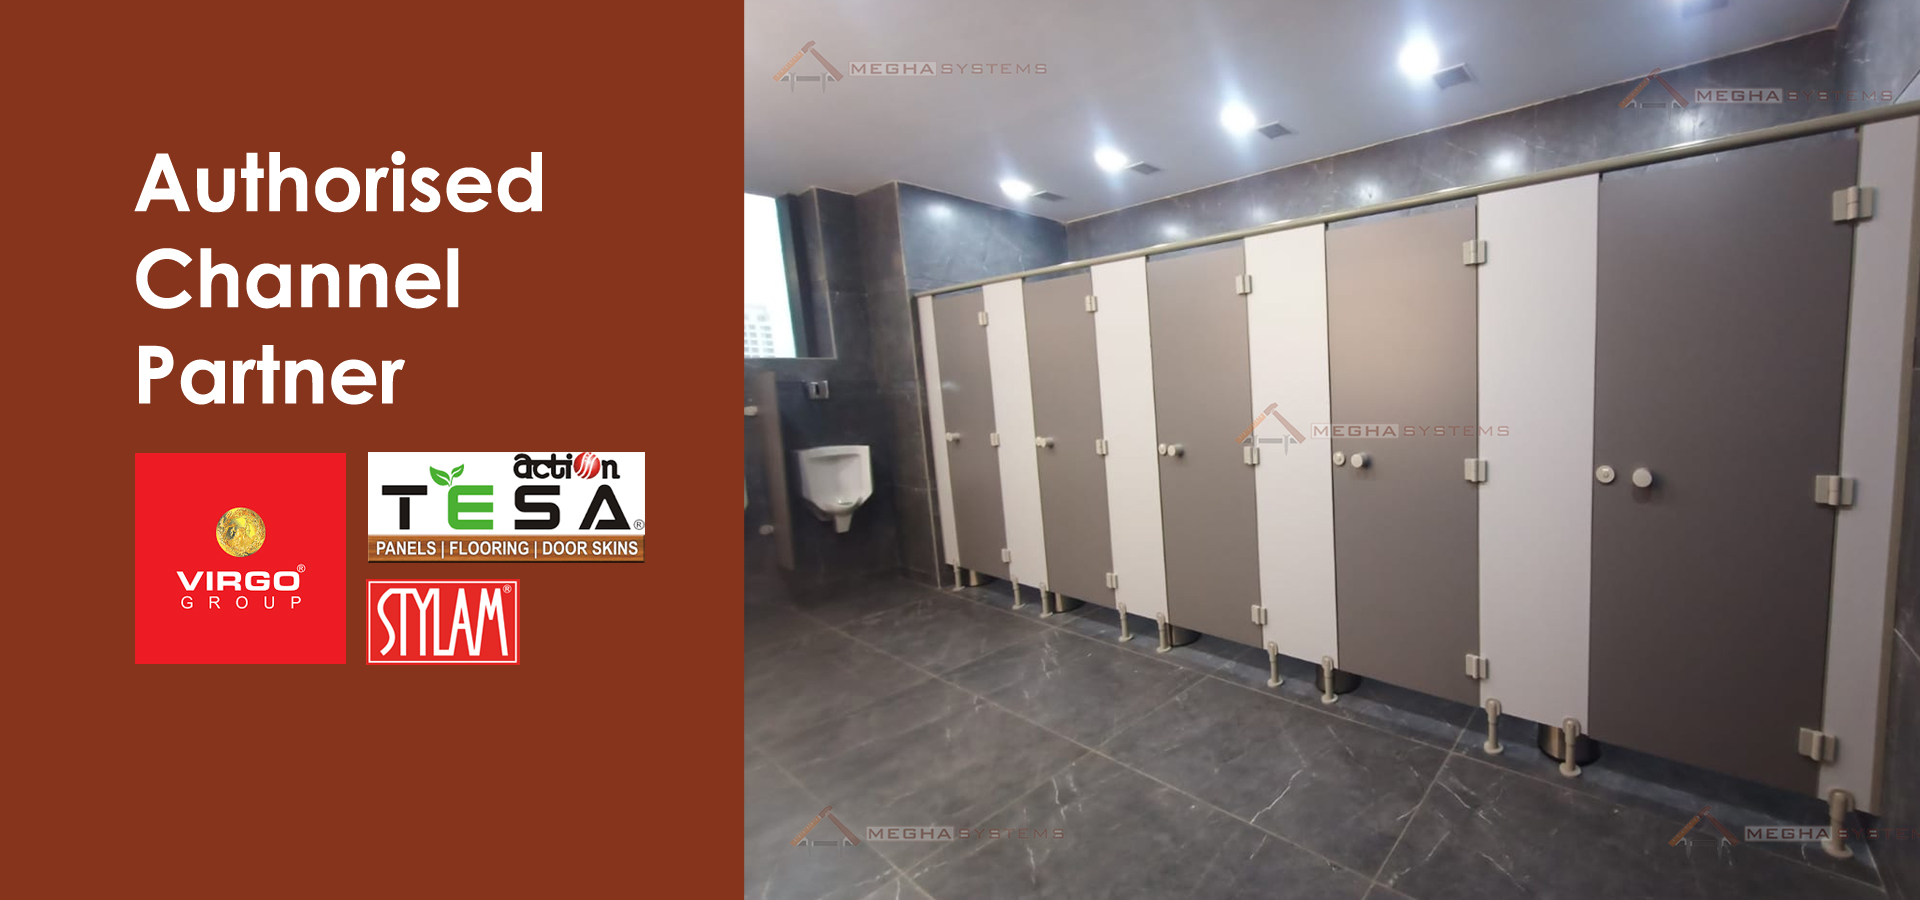 Toilet Cubicle Manufacturers in Delhi - Megha Systems